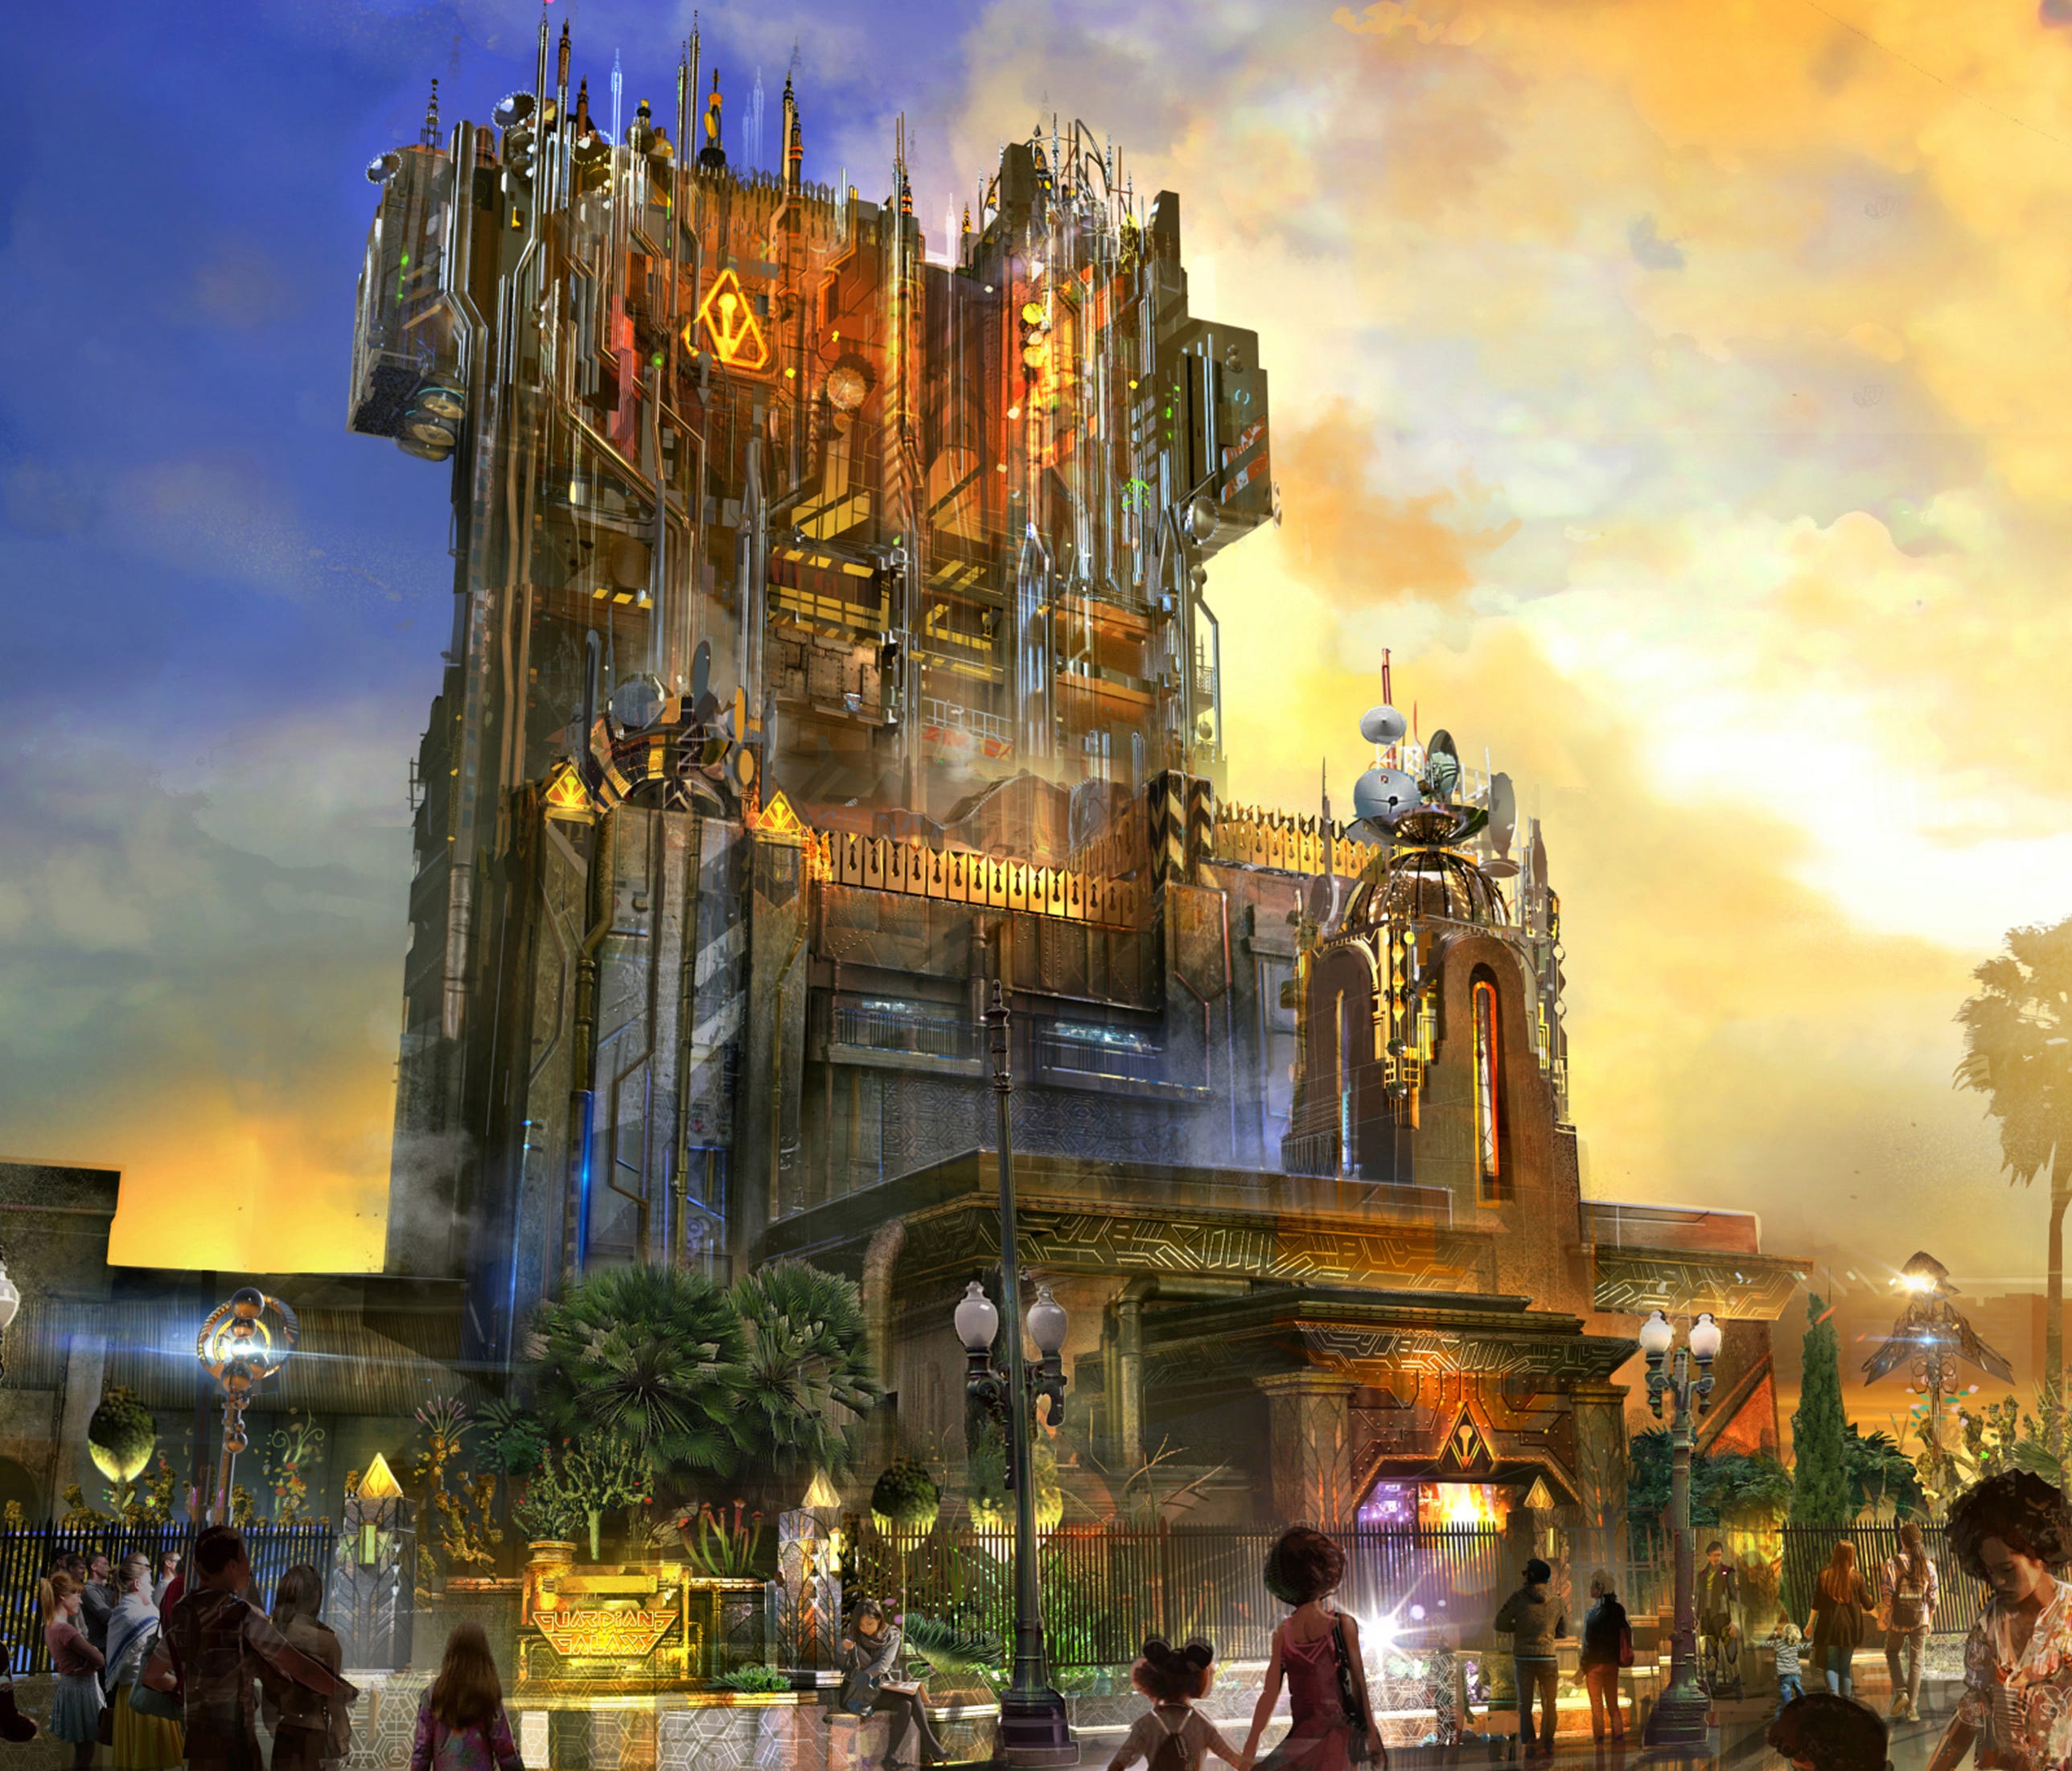 In Guardians of the Galaxy – Mission: Breakout! at Disney California Adventure, the quirky stars of the Marvel movies will be taking up residence in the Tower of Terror.